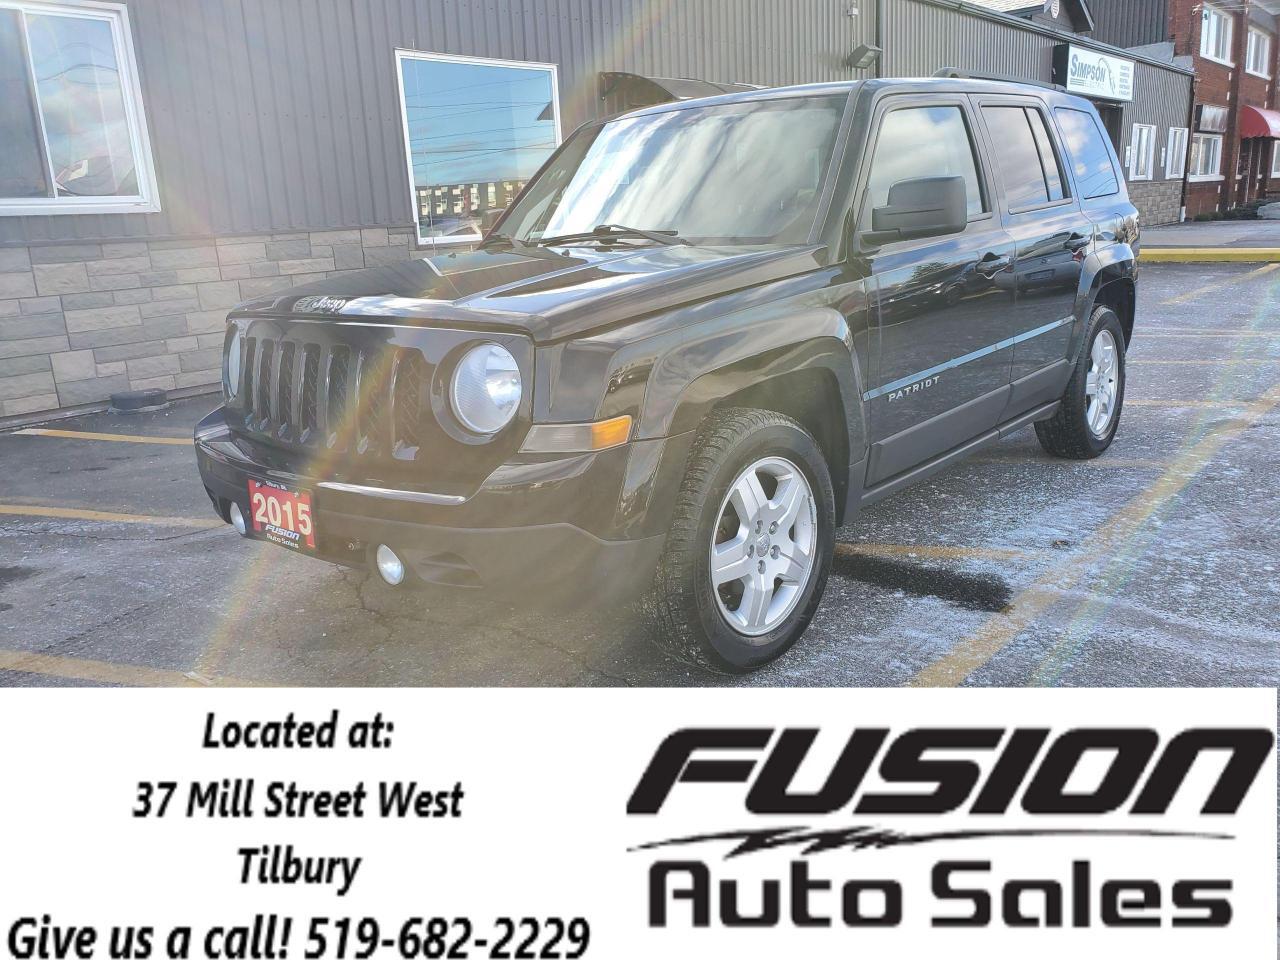 2015 Jeep Patriot north-NO HST TO A MAX OF $2000 LTD TIME ONLY